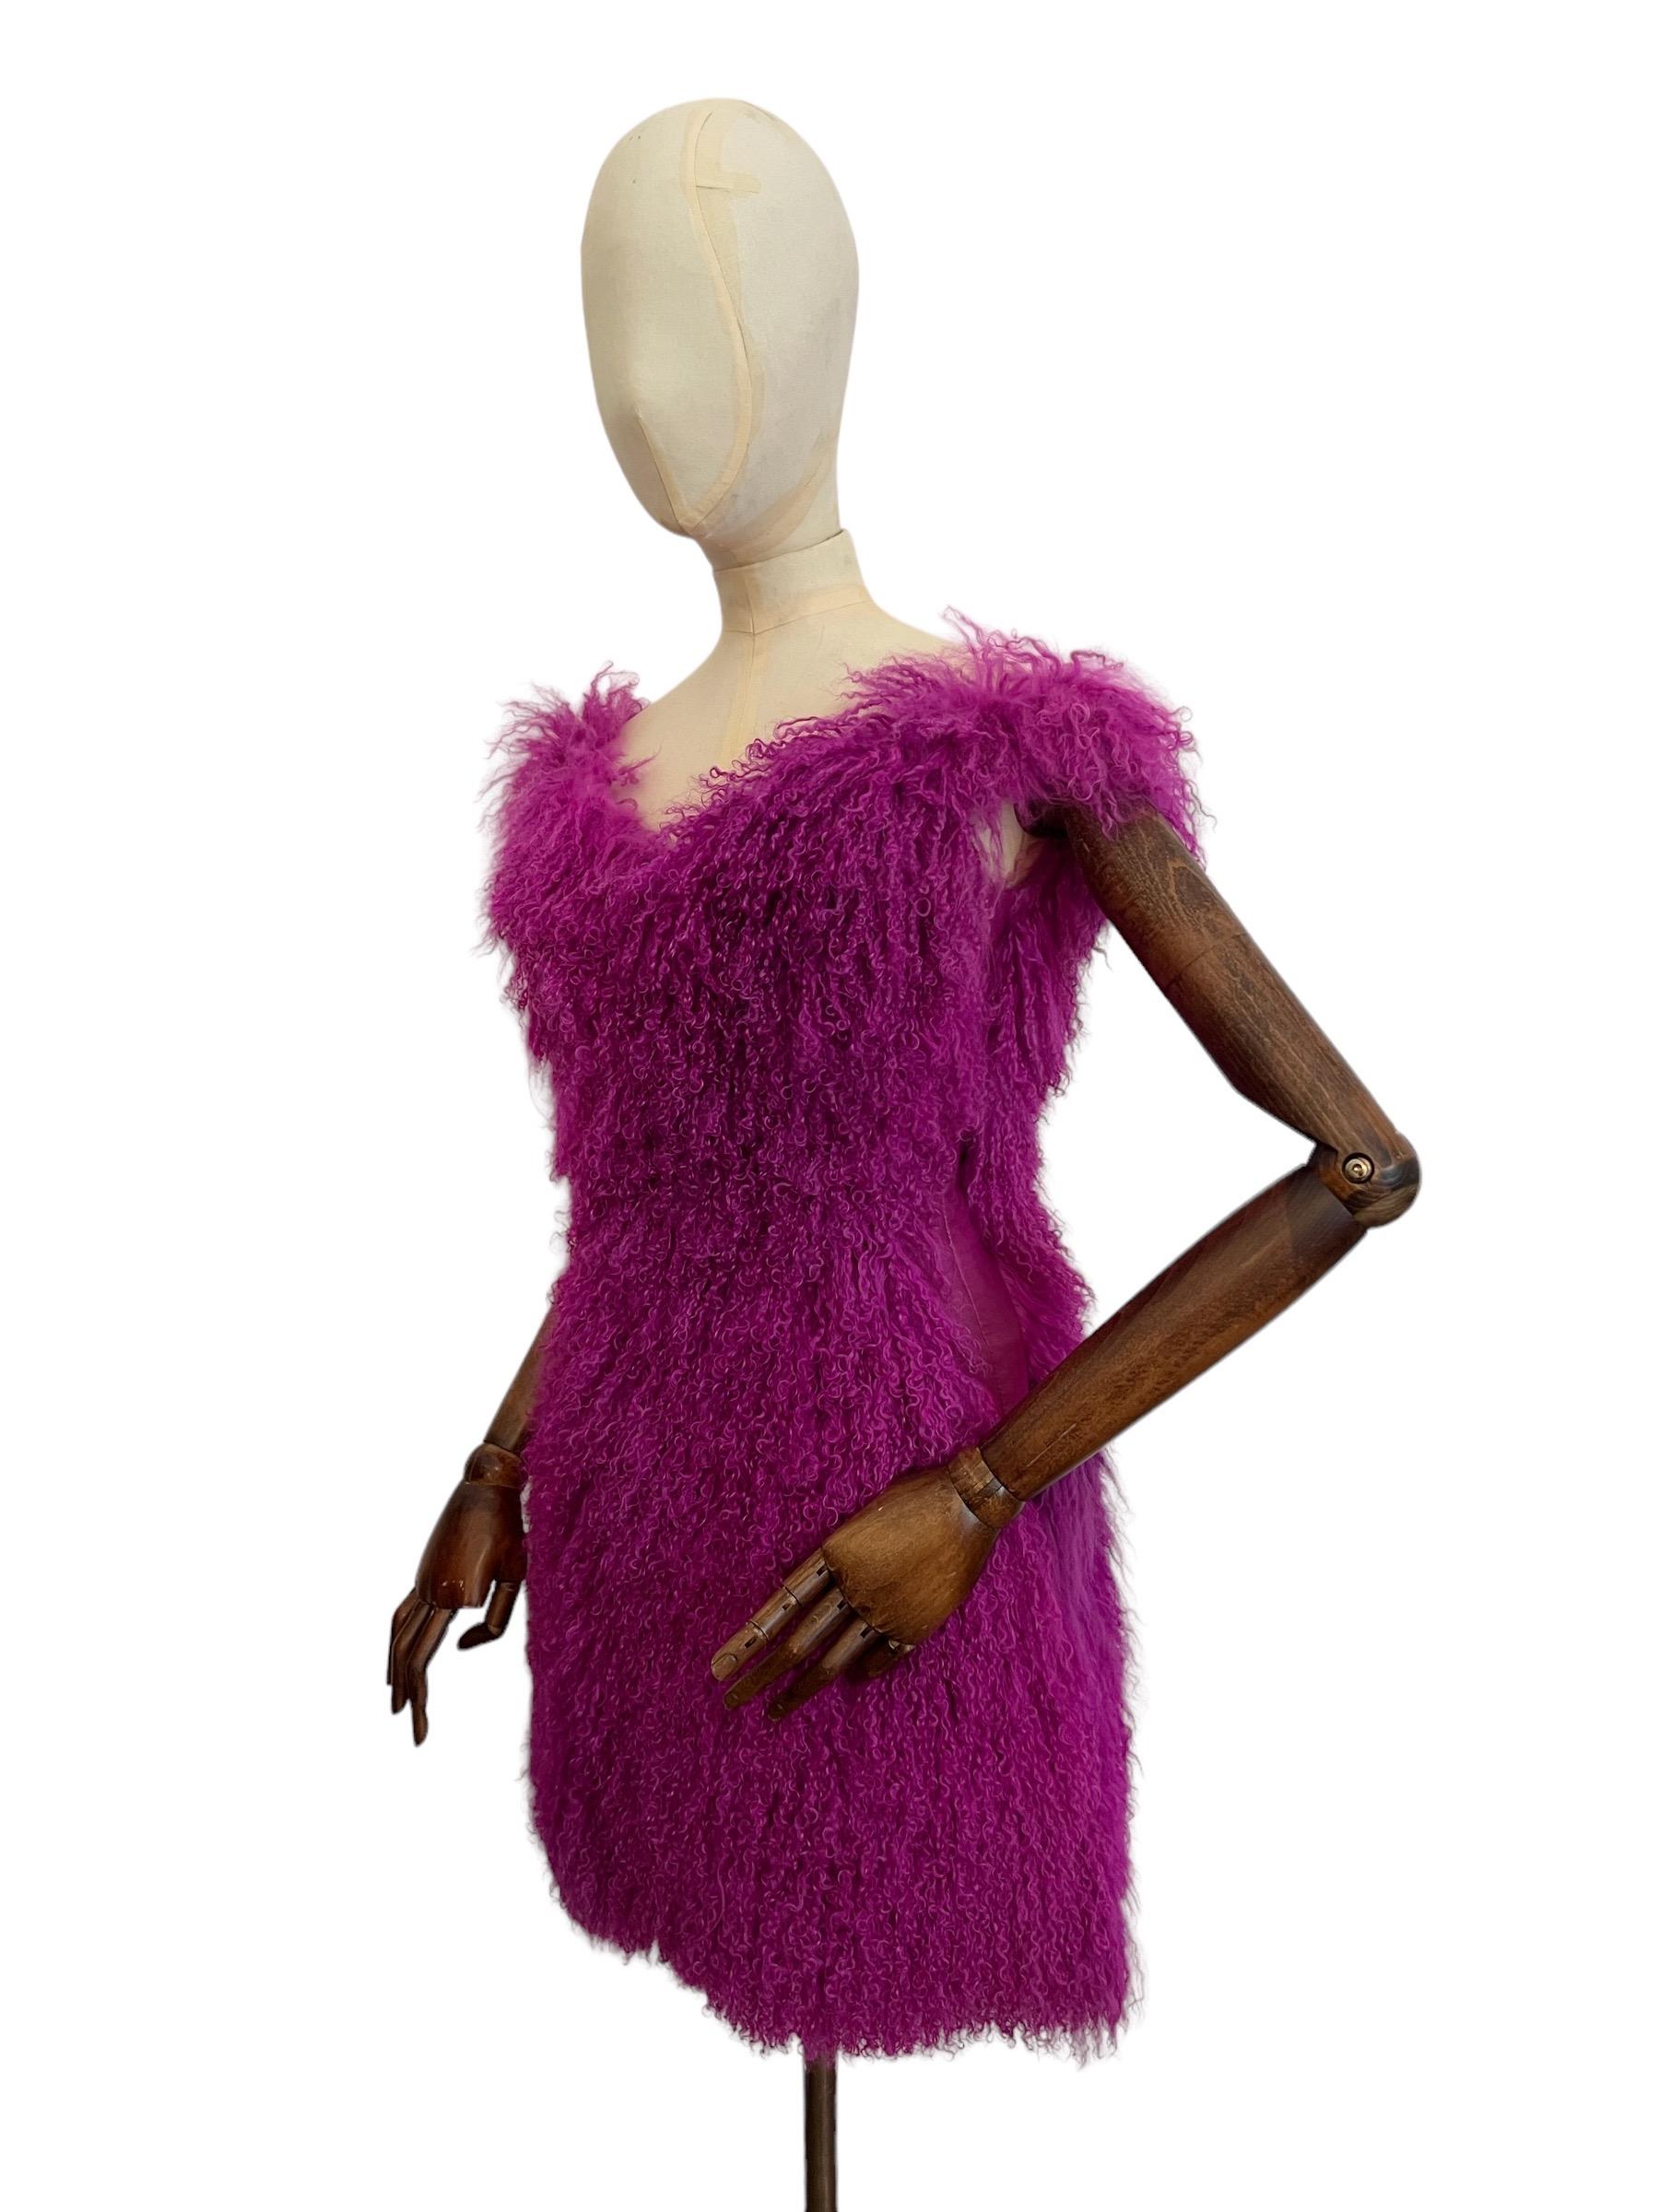 VERSUS Versace 2012 Runway dress in Magenta / Purple Mongolian Lamb Fur.

This Outrageous Fluffy dress is made from 100% Mongolian Lamb fur with butter soft leather Panelled sides, The back completely zips open and as you may see photographed can be